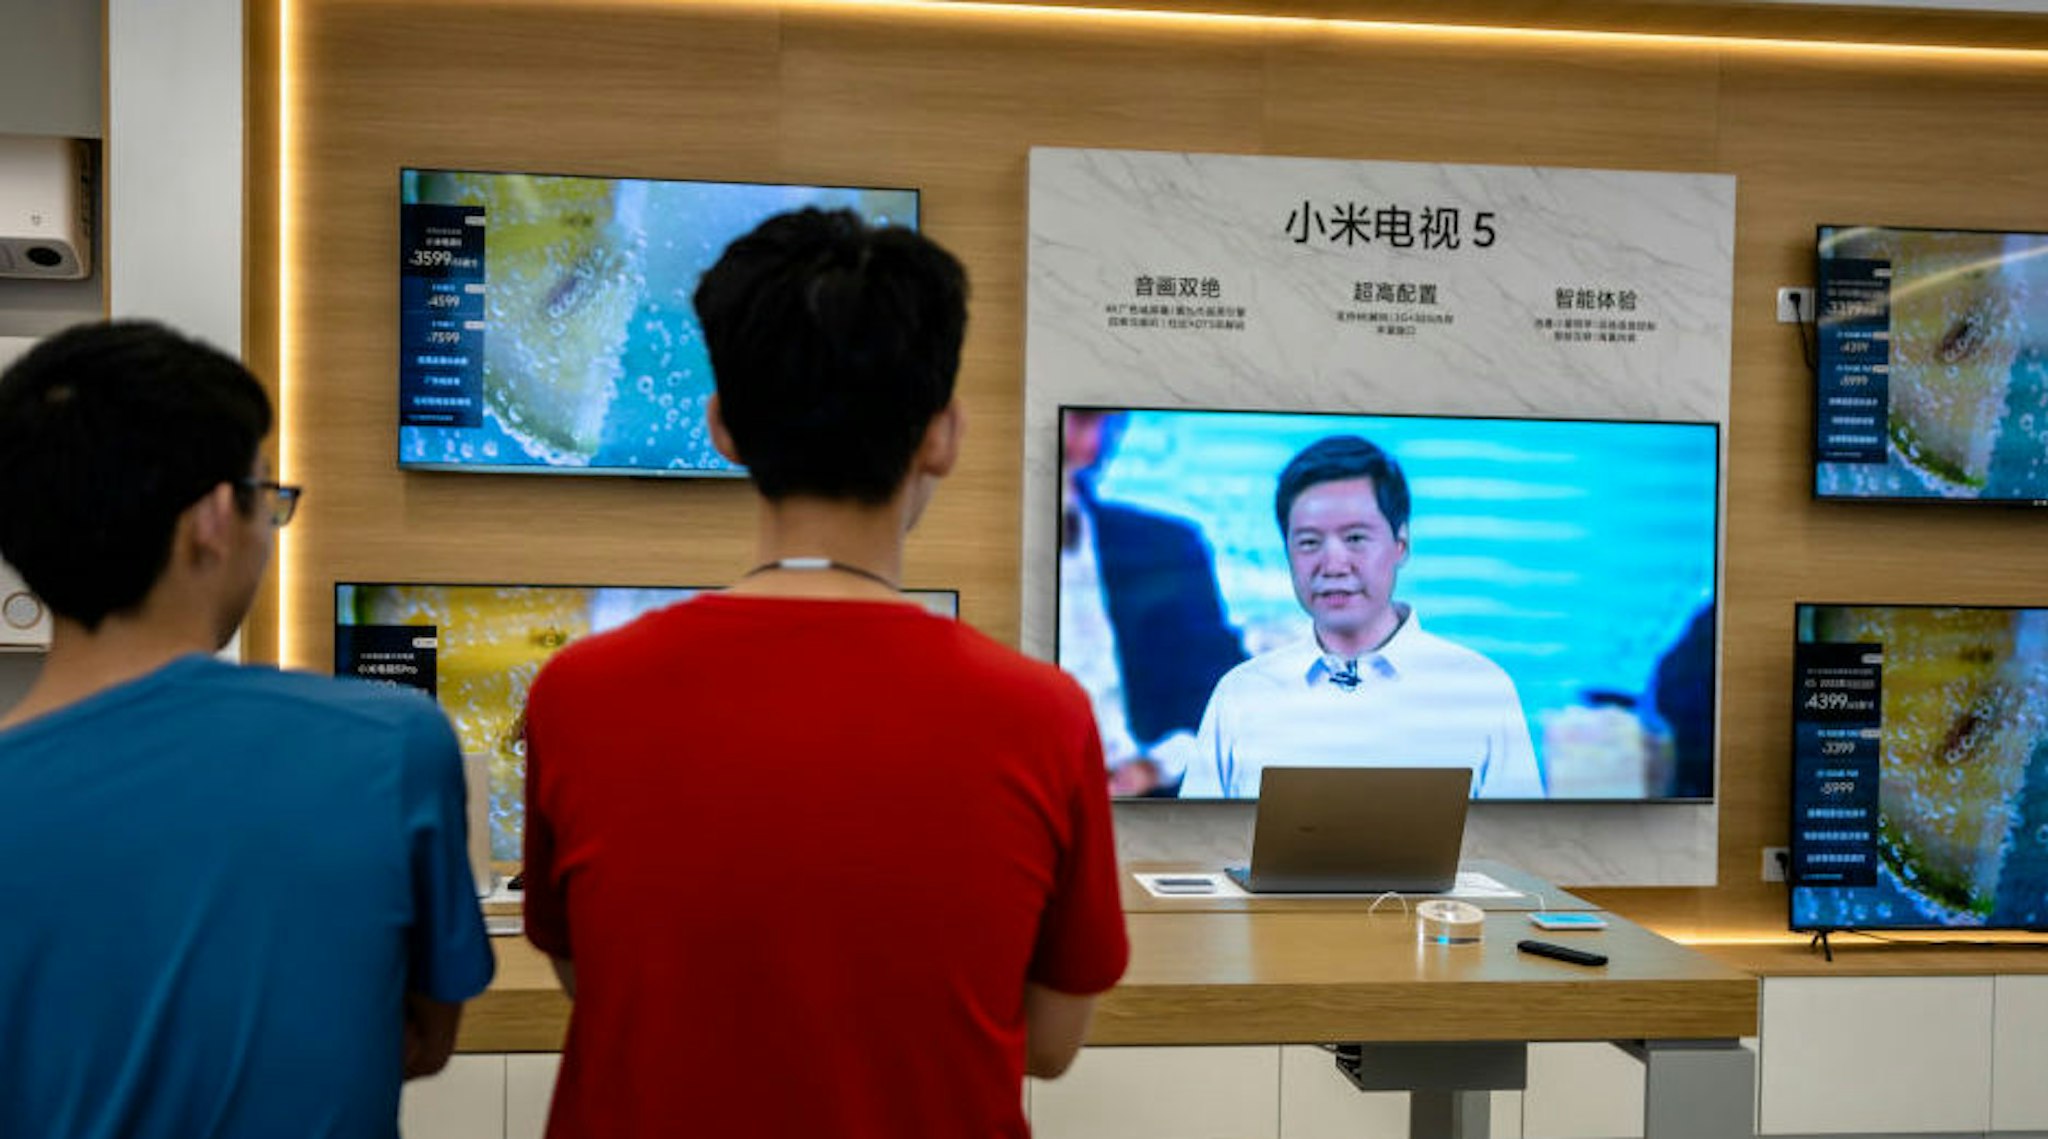 SHAOXING, CHINA - AUGUST 10: A TV inside a Xiaomi store broadcasts live Xiaomi's online product launch event on August 10, 2021 in Shaoxing, Zhejiang Province of China. Xiaomi founder and CEO Lei Jun launched Mi MIX 4 smartphones on Tuesday.